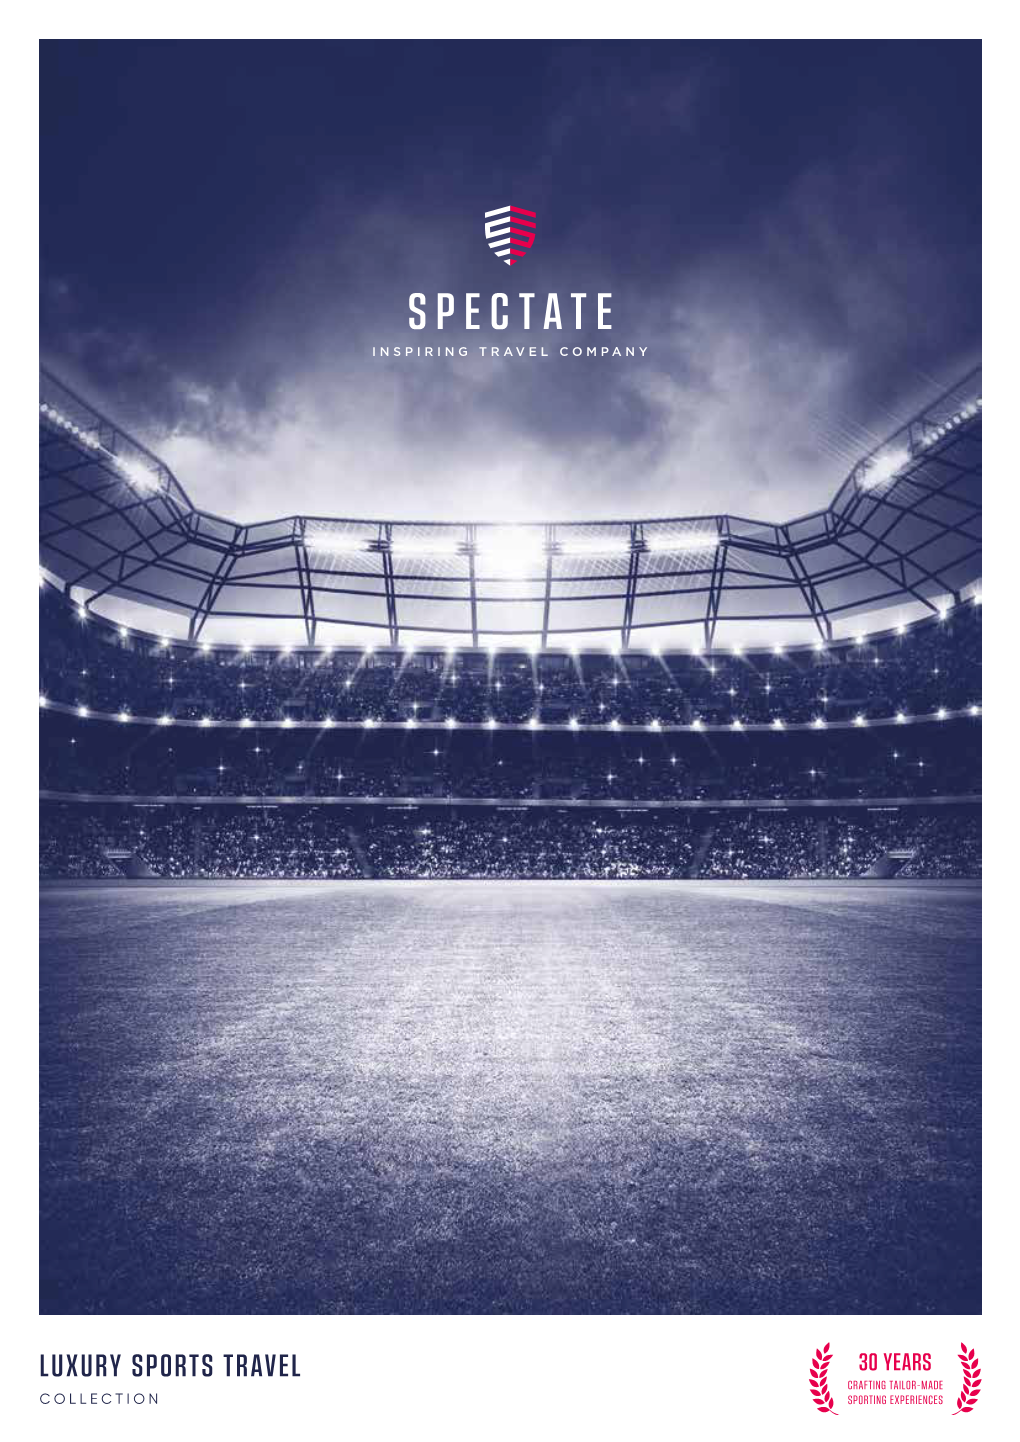 Luxury Sports Travel 30 Years Crafting Tailor-Made Collection Sporting Experiences a Luxury Sports Travel Specialist Welcome to Spectate